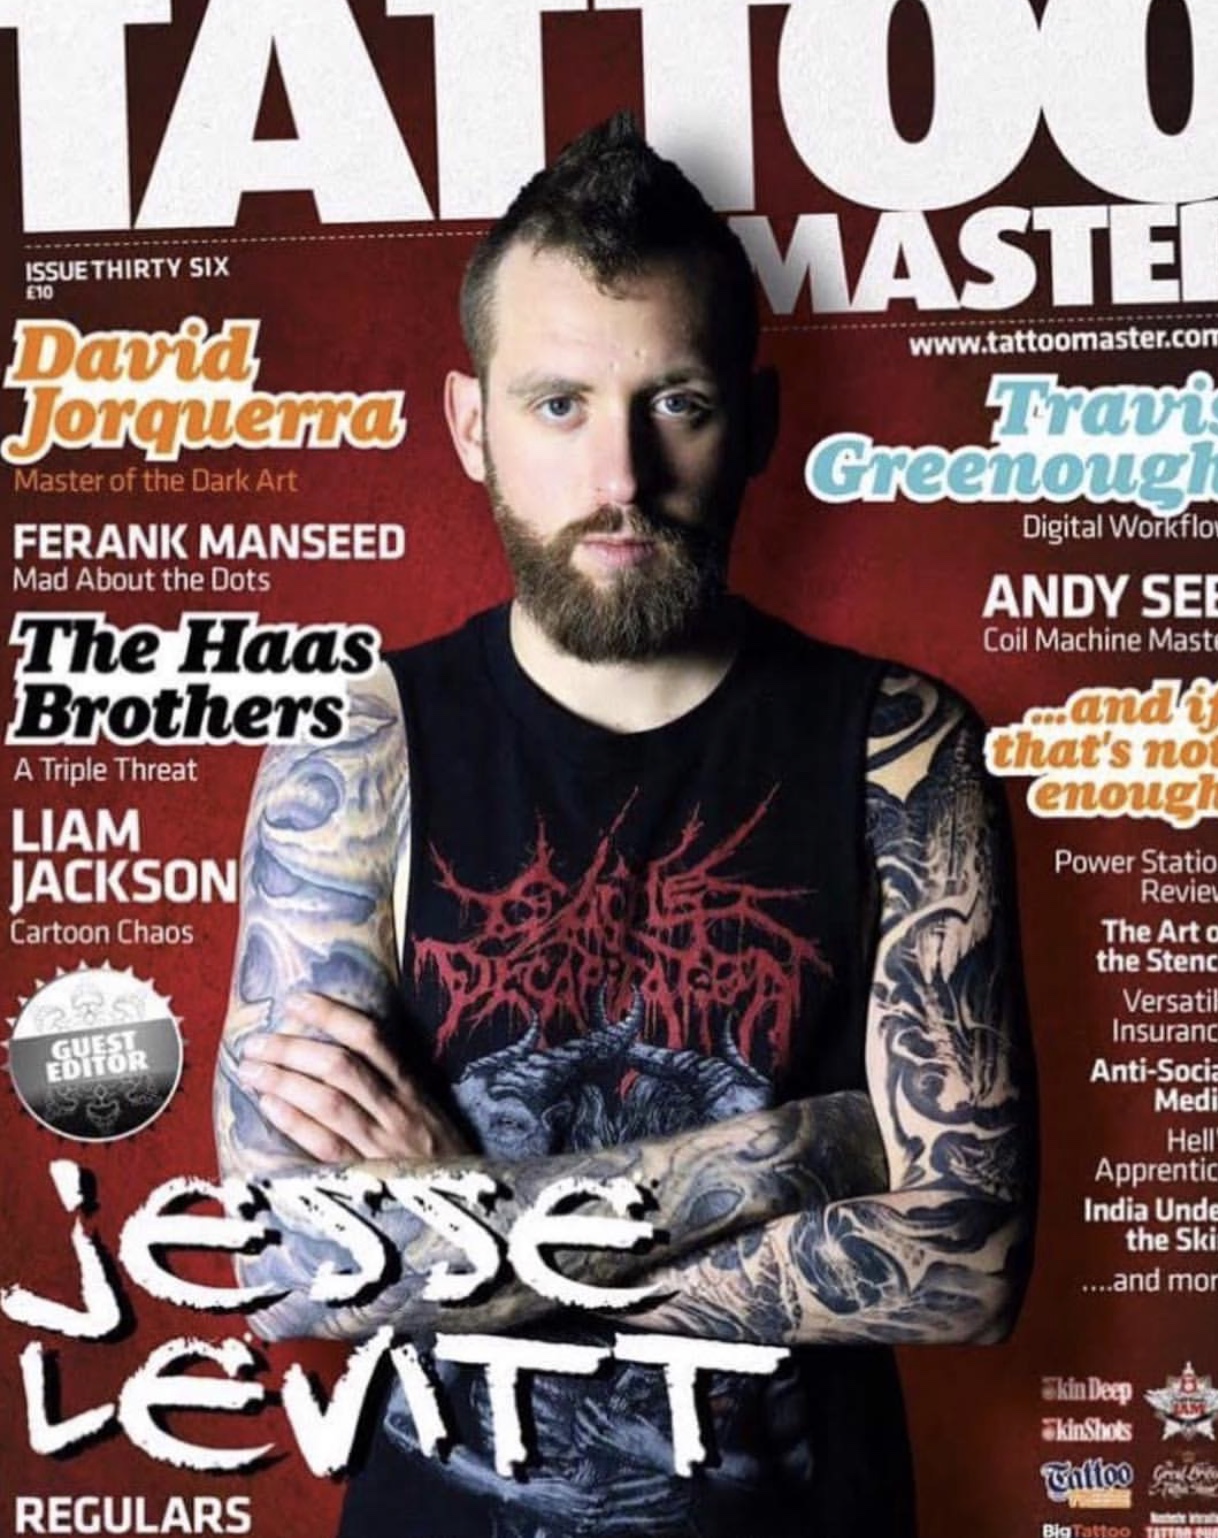 Tattoo Master cover!